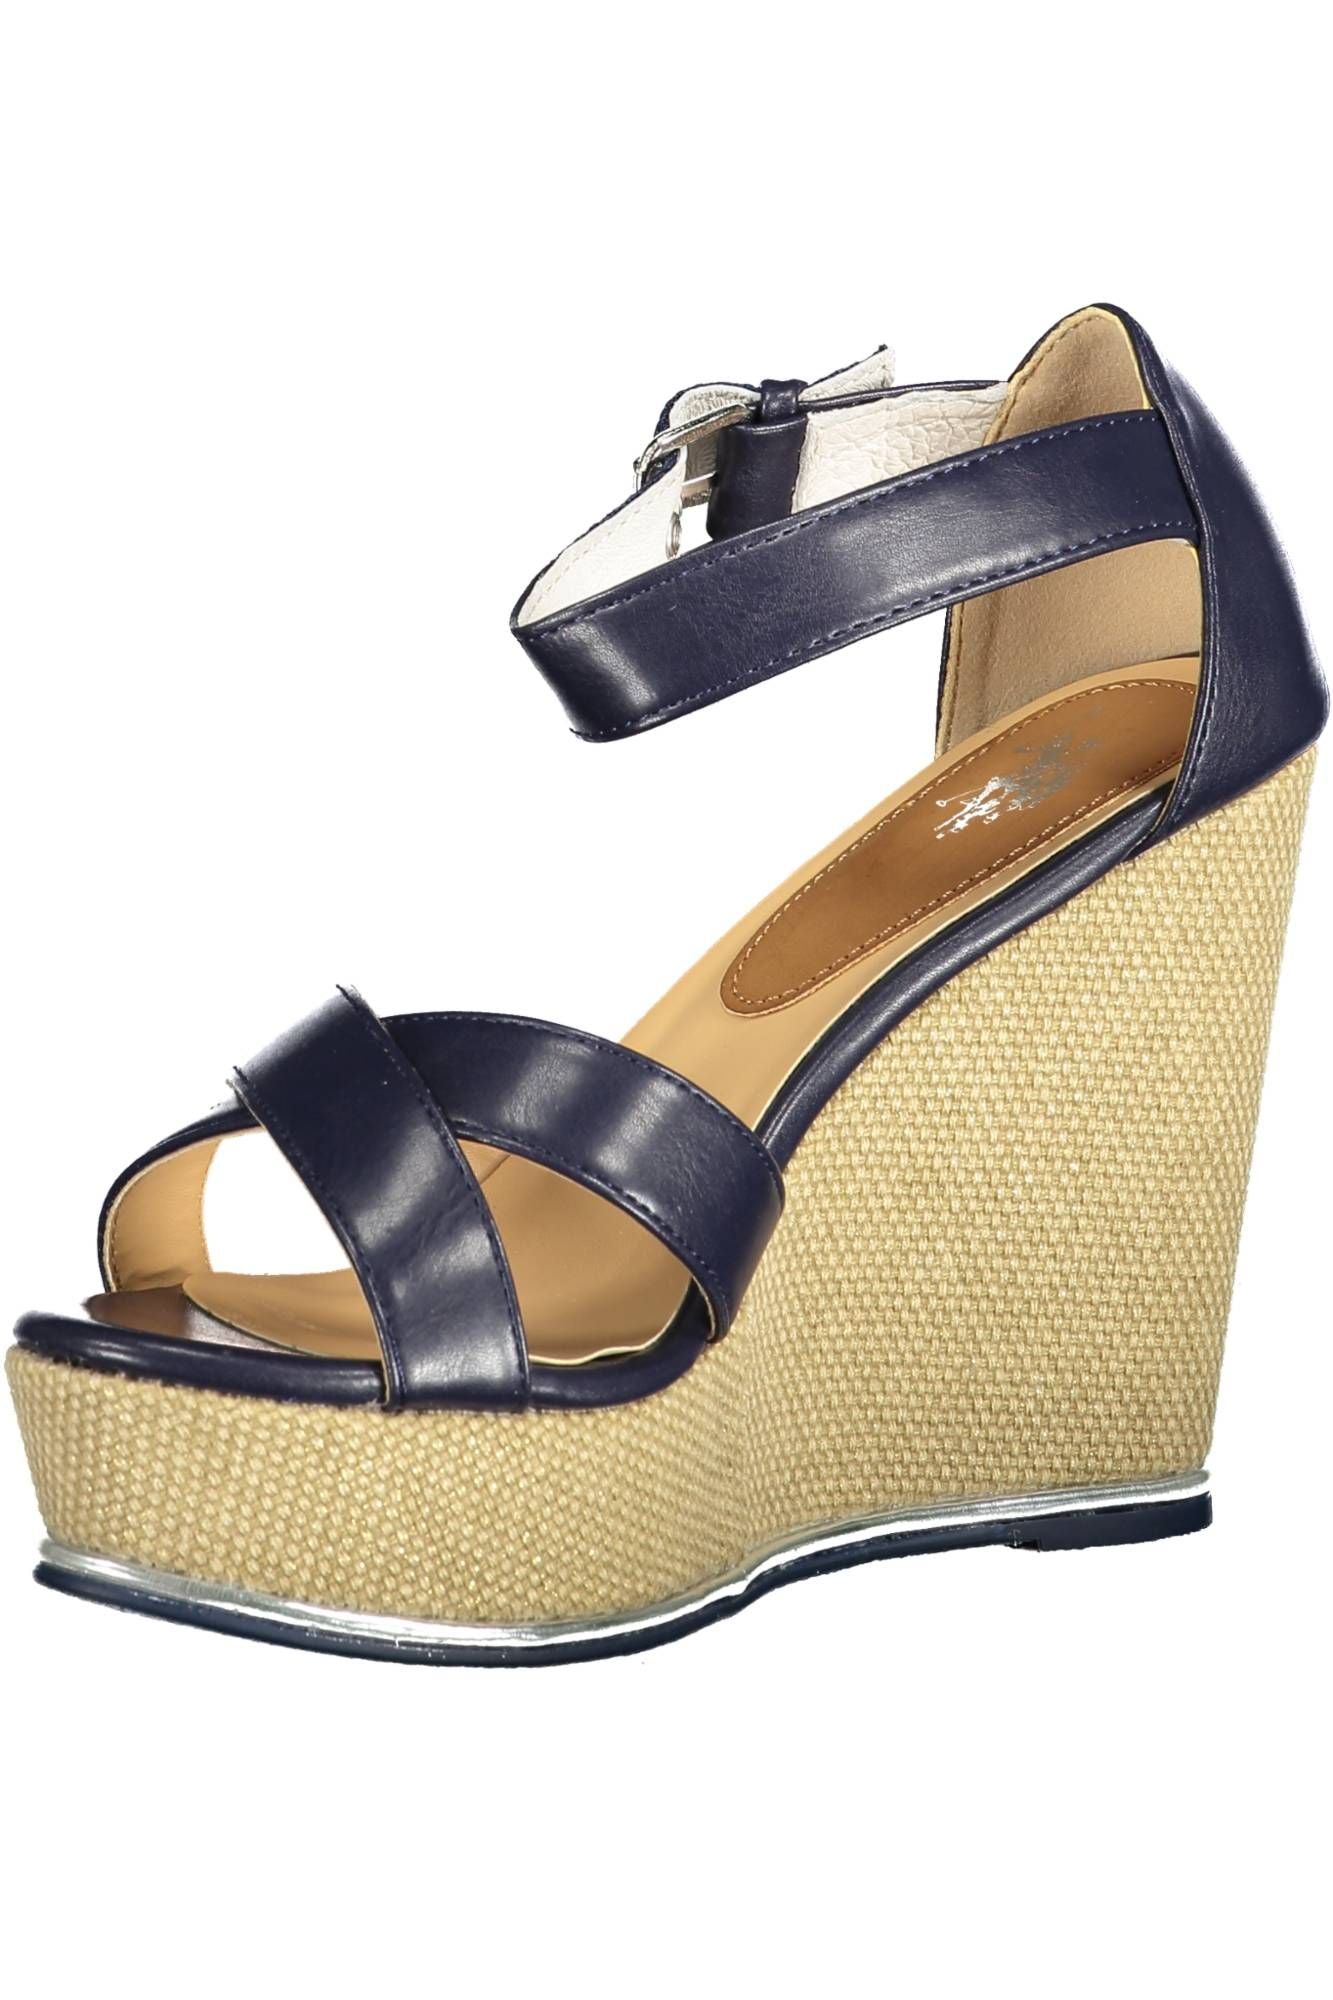 Chic Ankle-Strap Wedge Sandals with Logo Detail